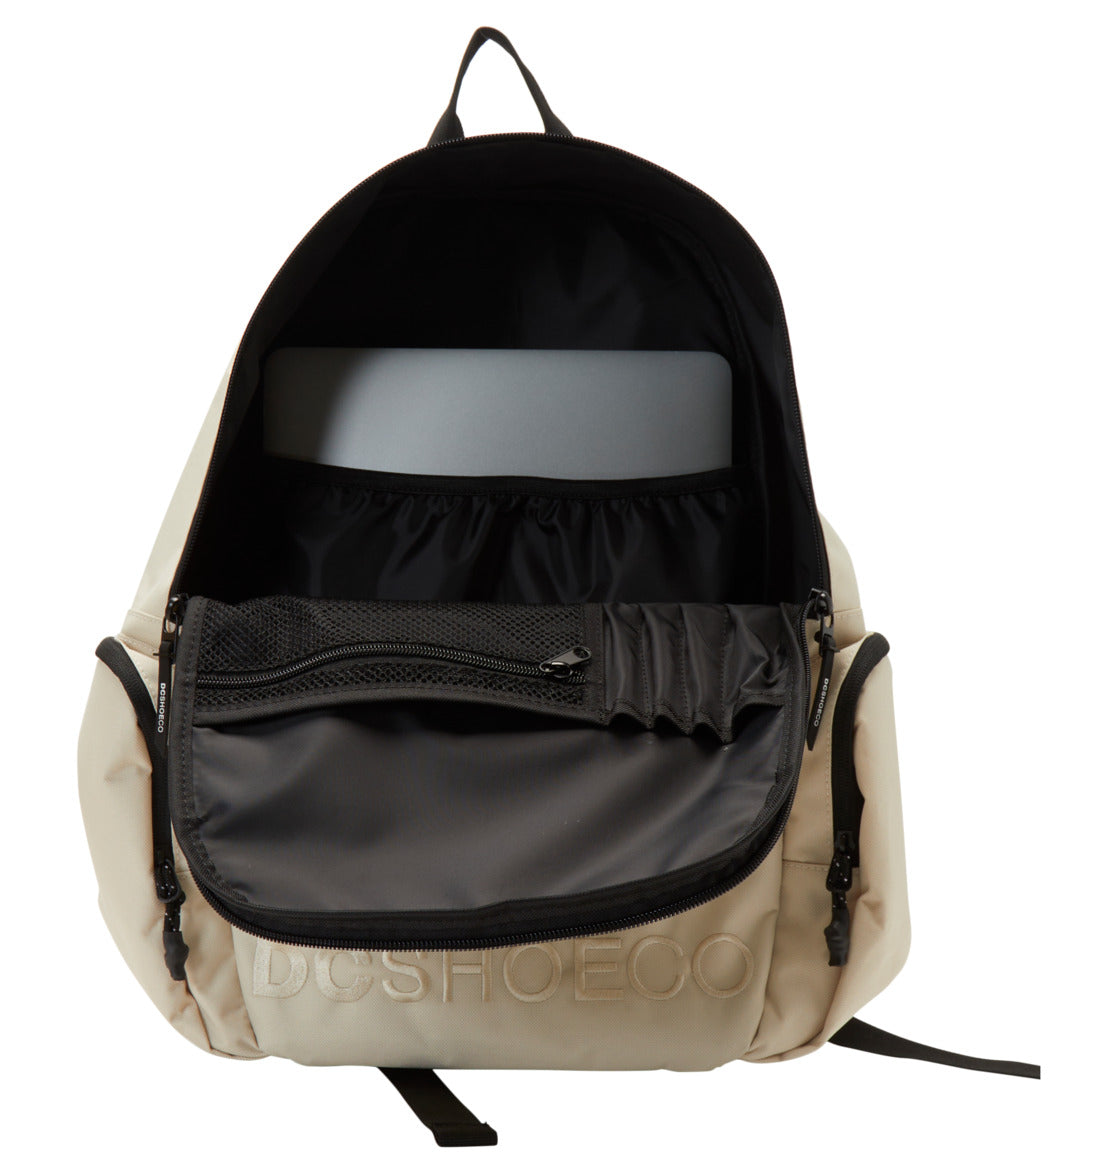 DC Shoes Breed 5 Rucksack Backpack - Birch